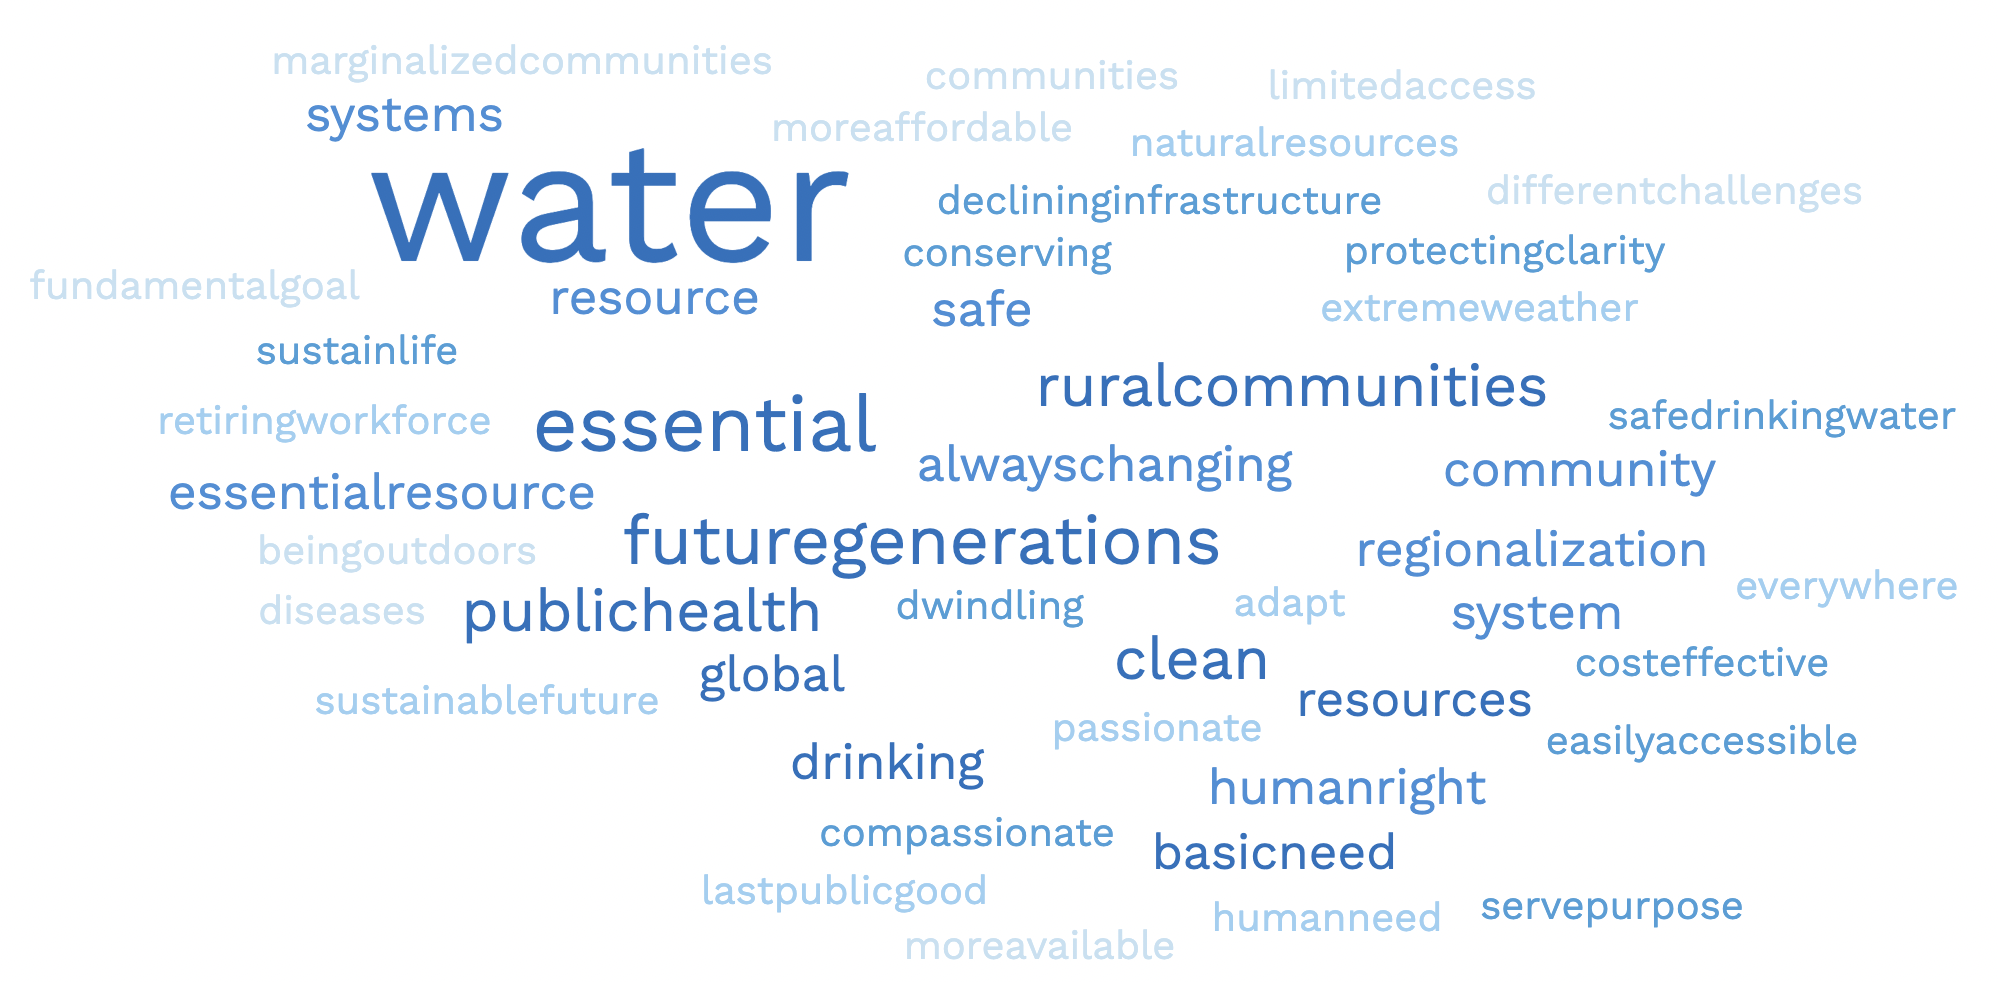 Image includes many words associated with water utilities including water, essential need, public health, retiring workforce, extreme weather, conserving, declining infrastructure, and more.